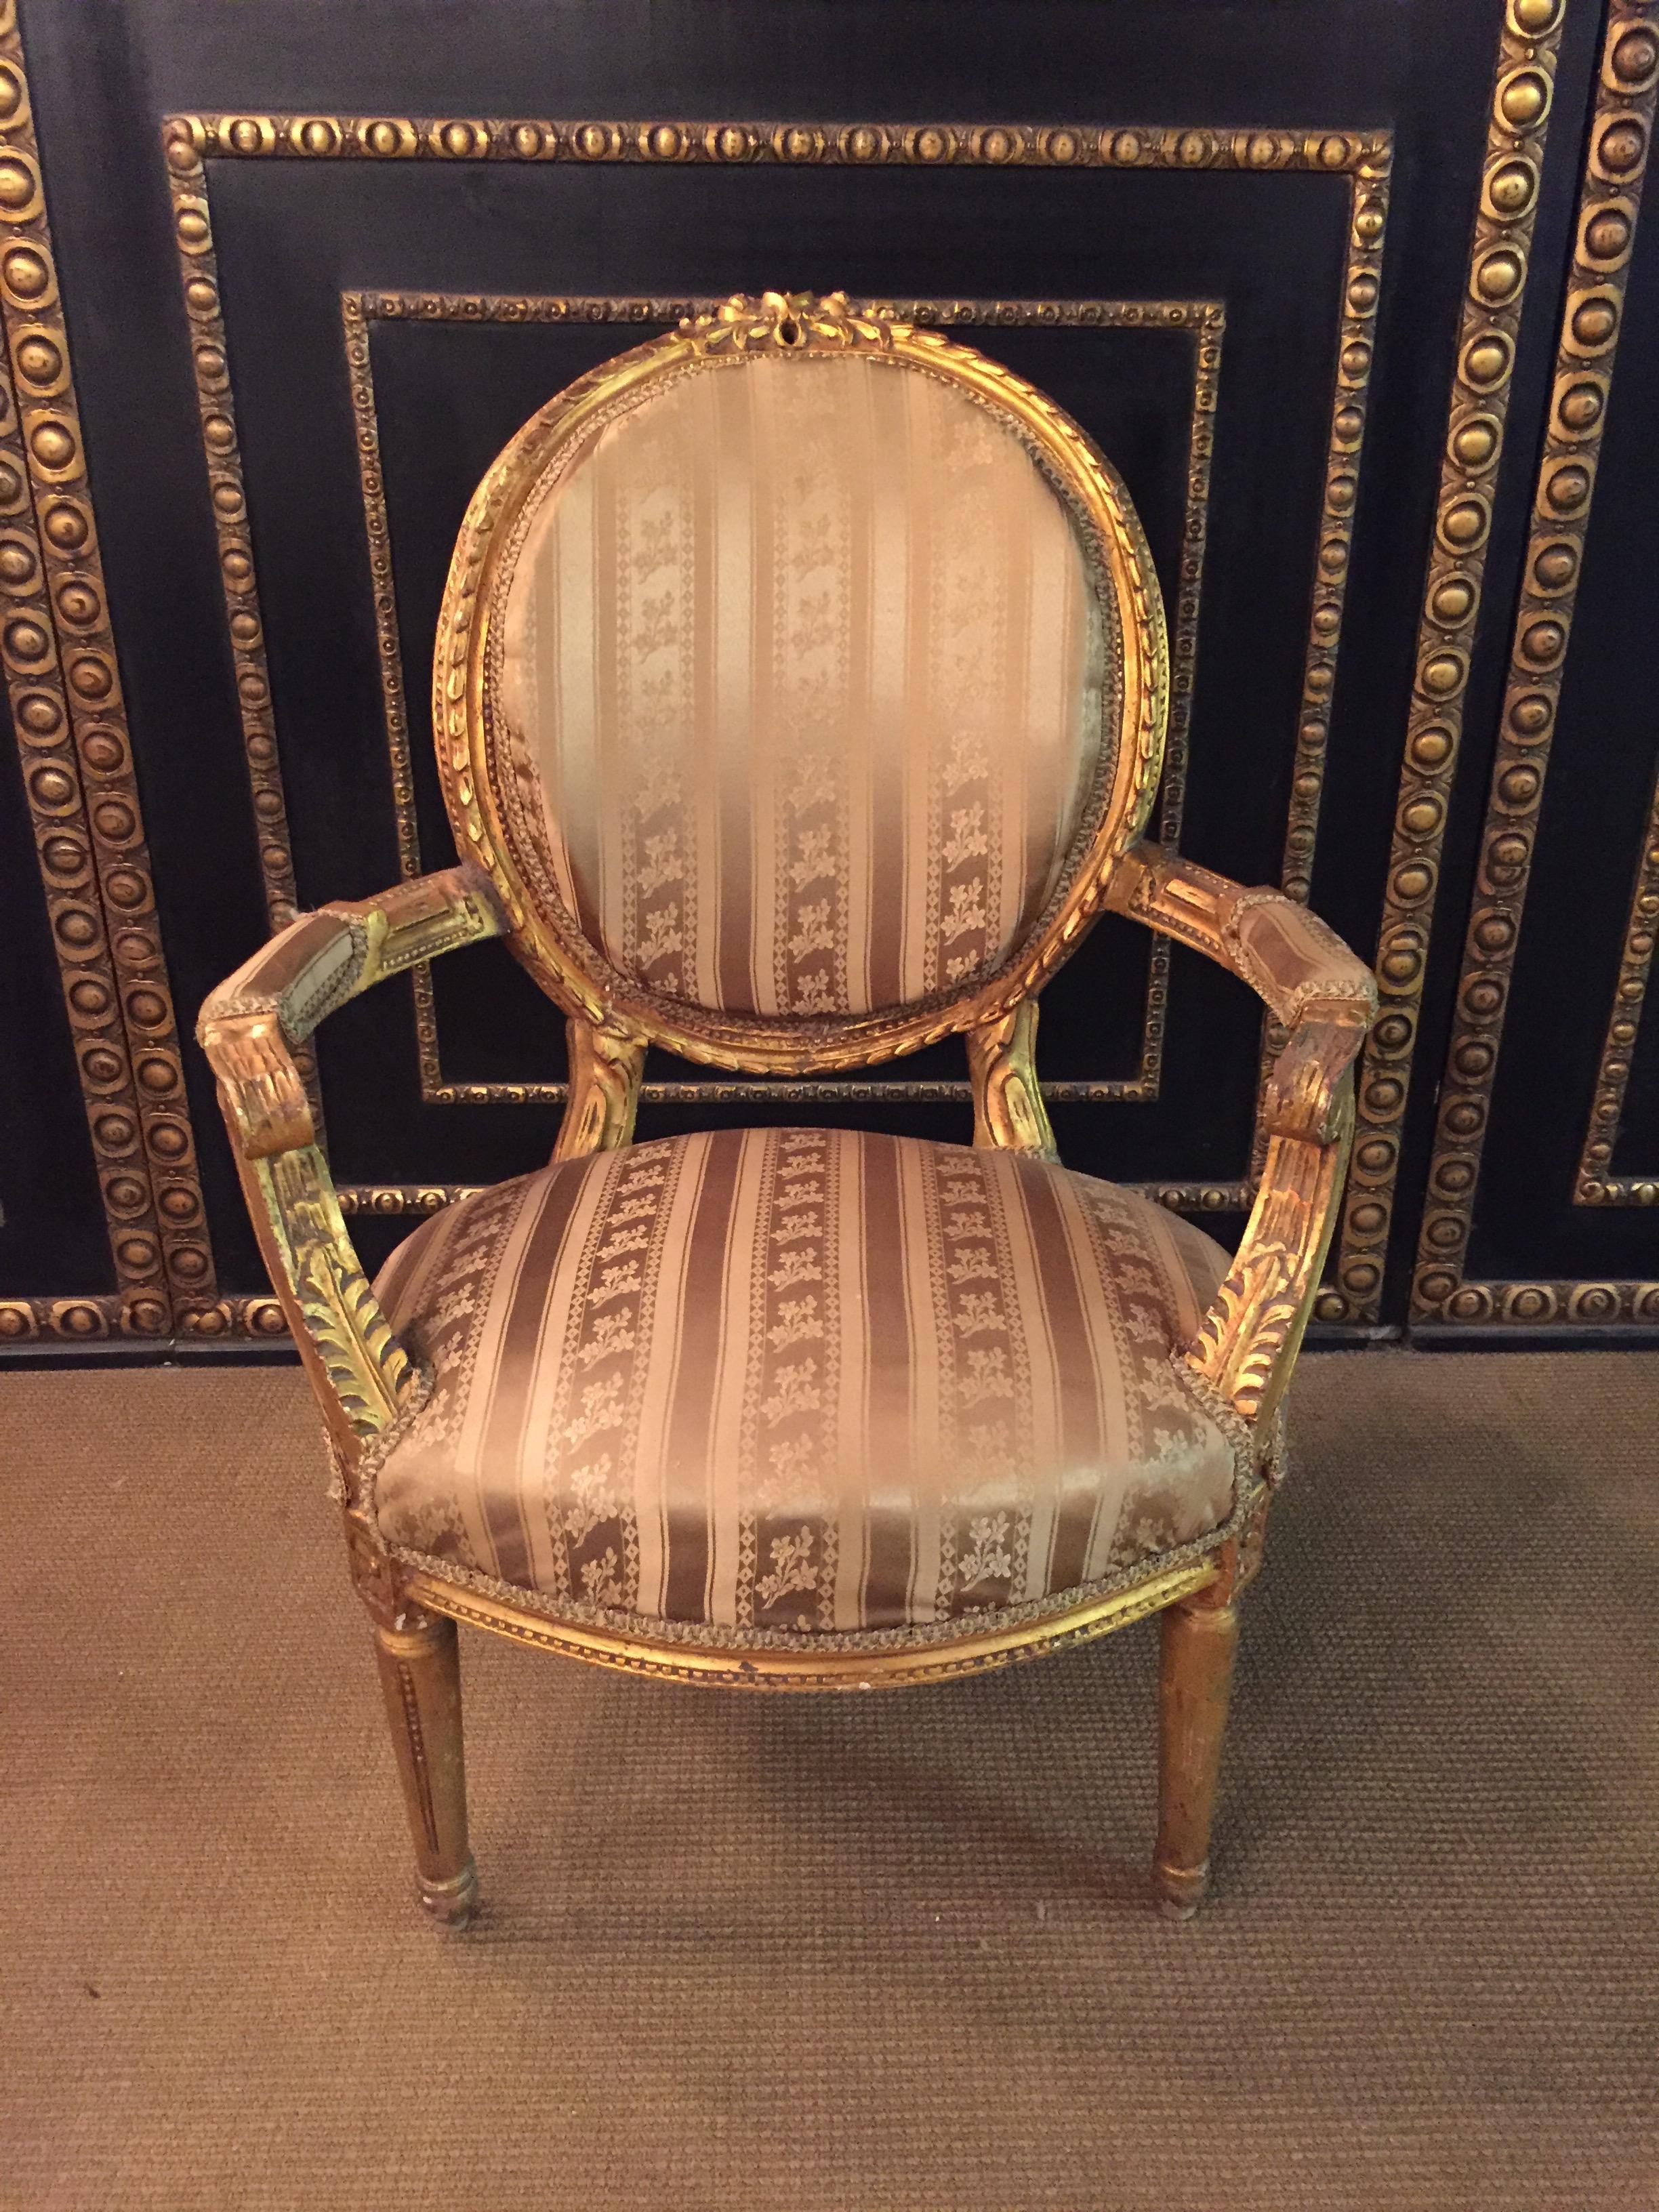 Solid beechwood, set and gilded. Cambered and carved frame on fluted, pointed legs. Curly armrests. Straight supports with applied acanthus leaves. Rising armrests in oval back frame ending in carved Rocaillenbekrönung. Seat and backrest are